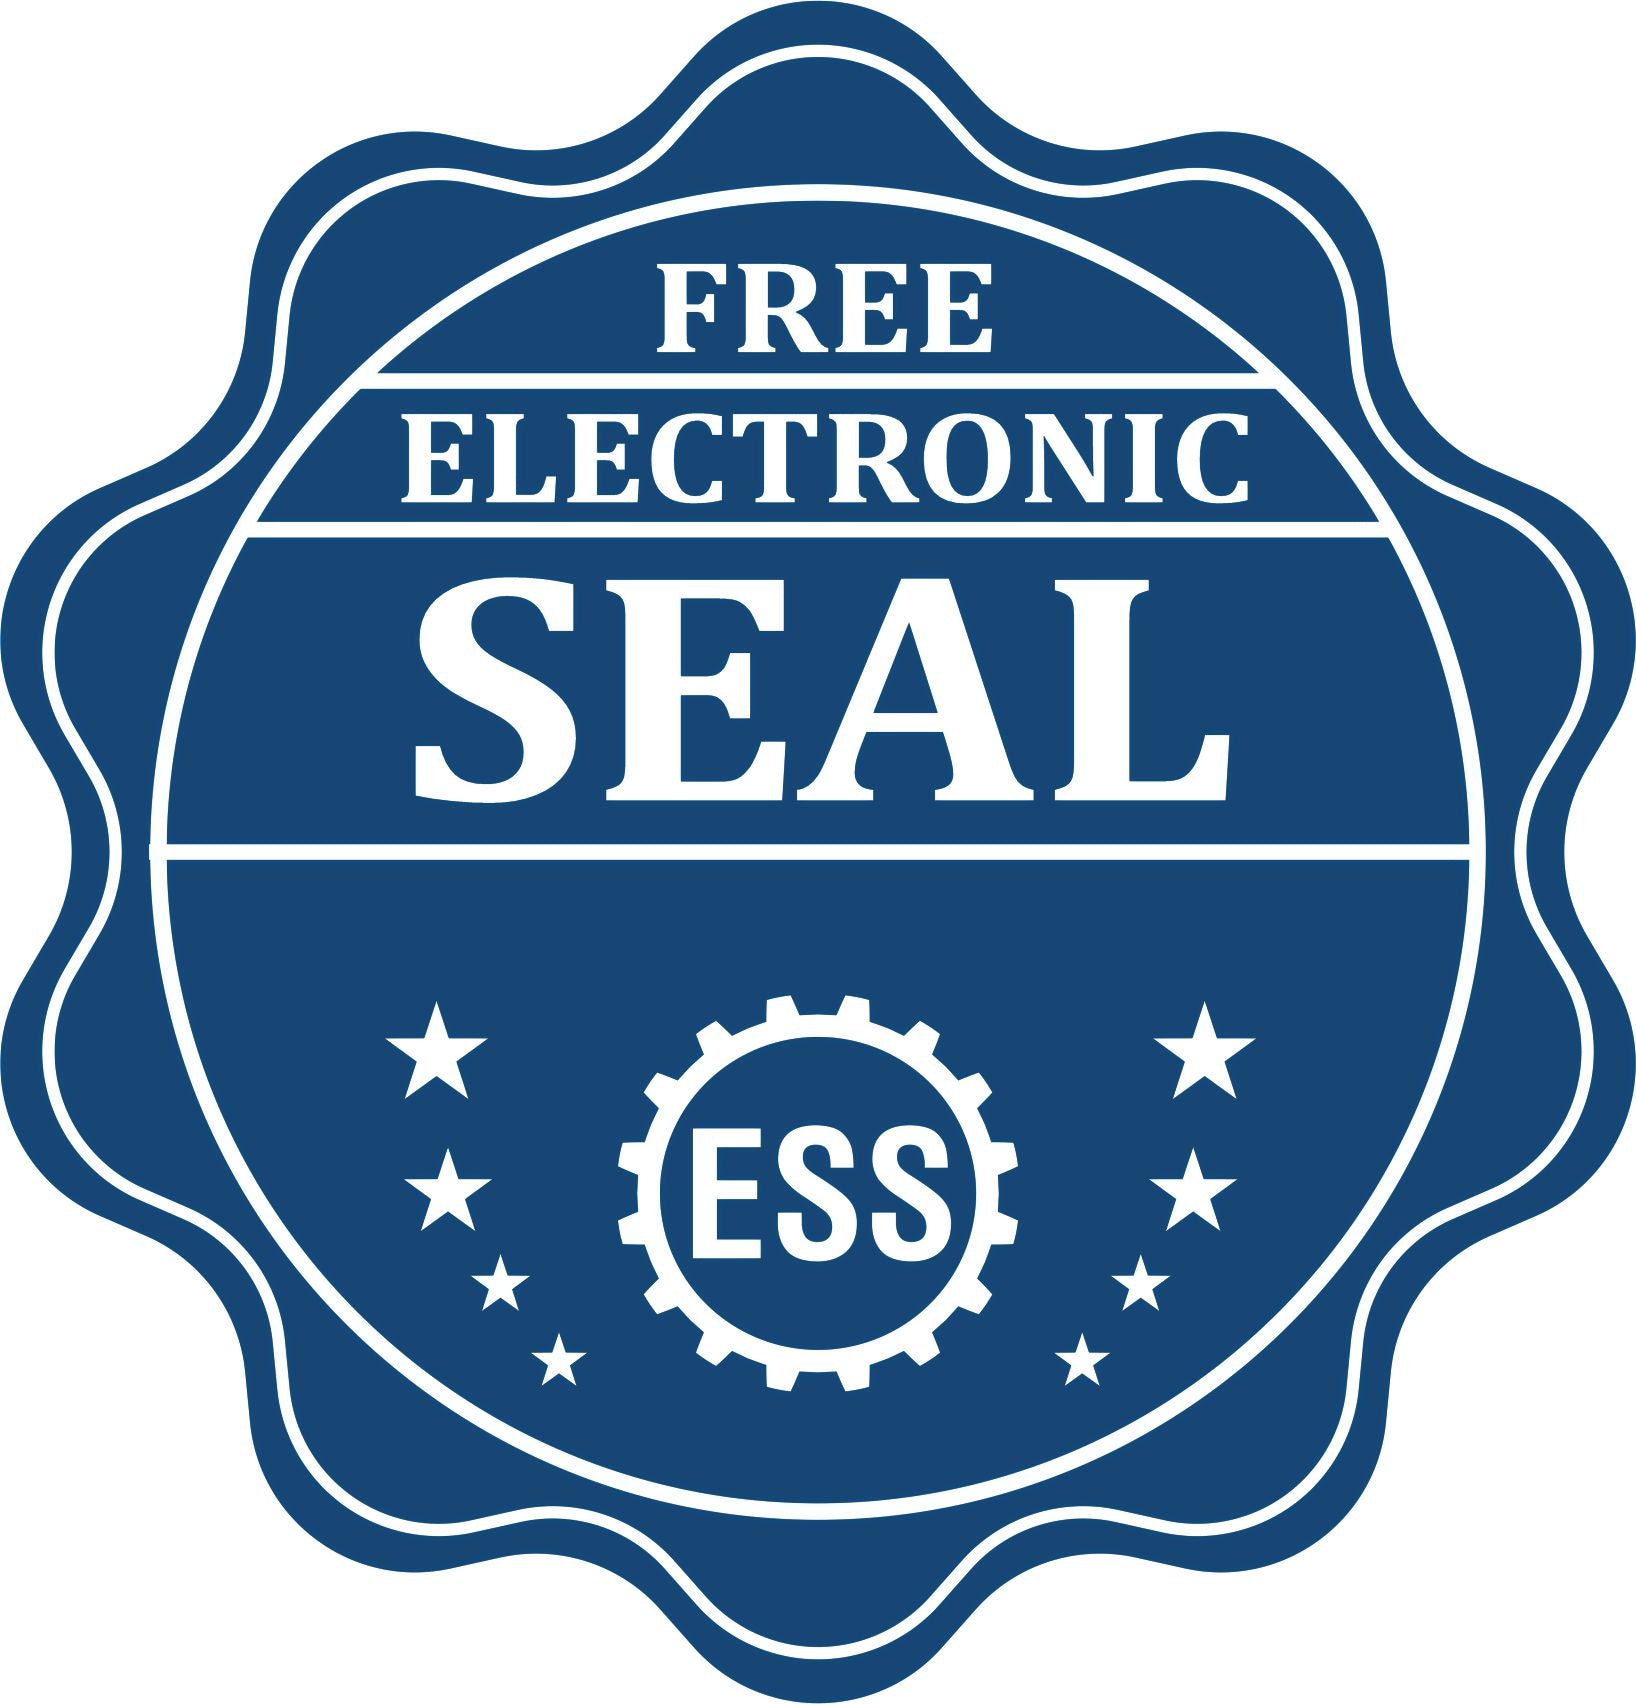 A badge showing a free electronic seal for the Long Reach Missouri Land Surveyor Seal with stars and the ESS gear on the emblem.